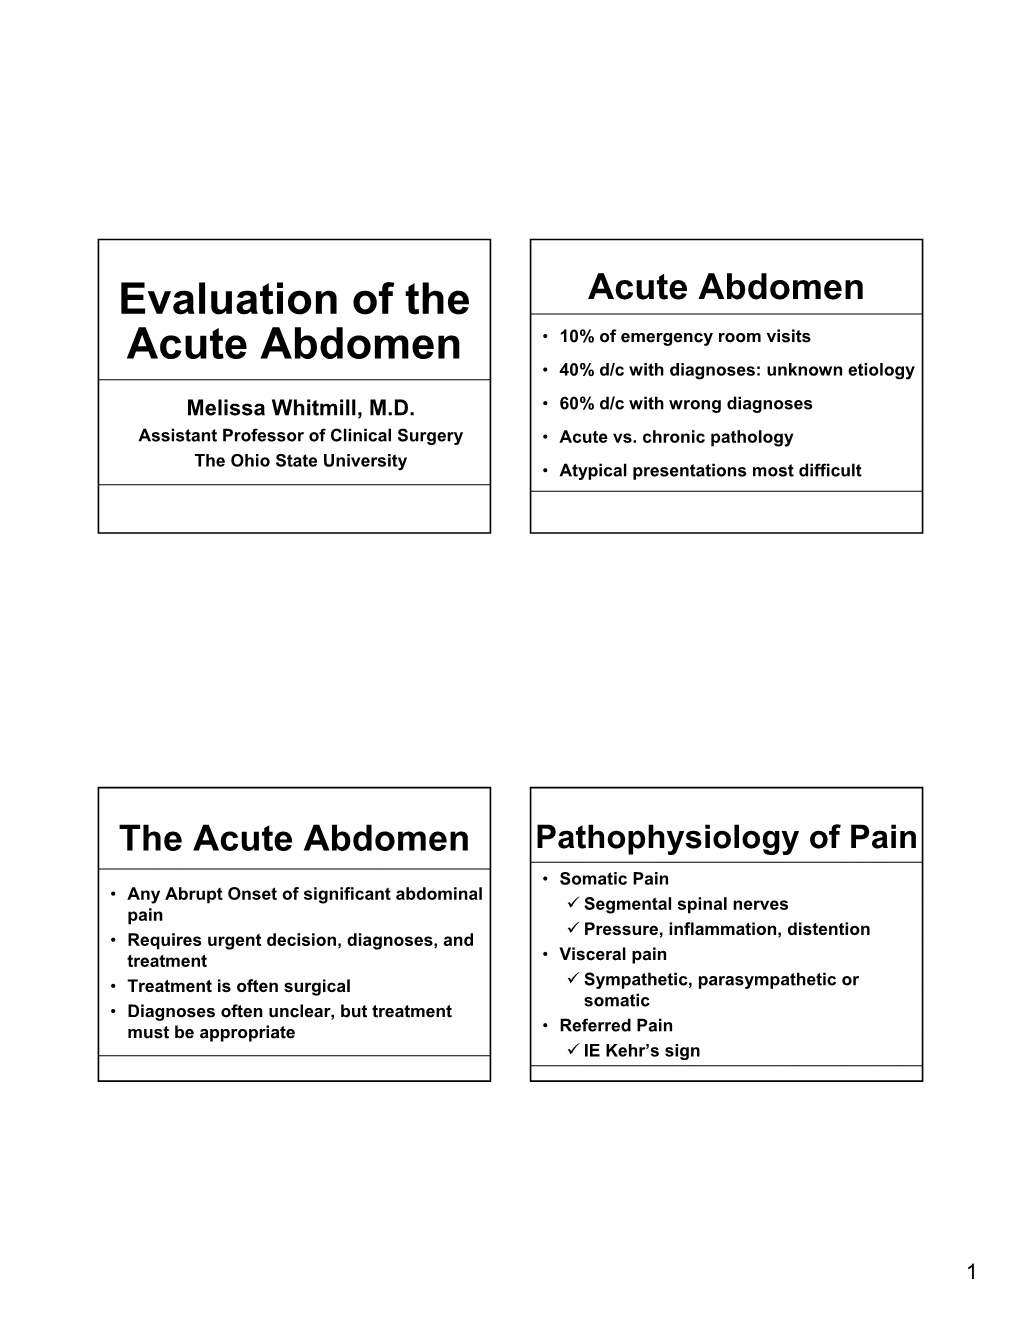 Evaluation of the Acute Abdomen Acute Abdomen • 10% of Emergency Room Visits • 40% D/C with Diagnoses: Unknown Etiology Melissa Whitmill, M.D